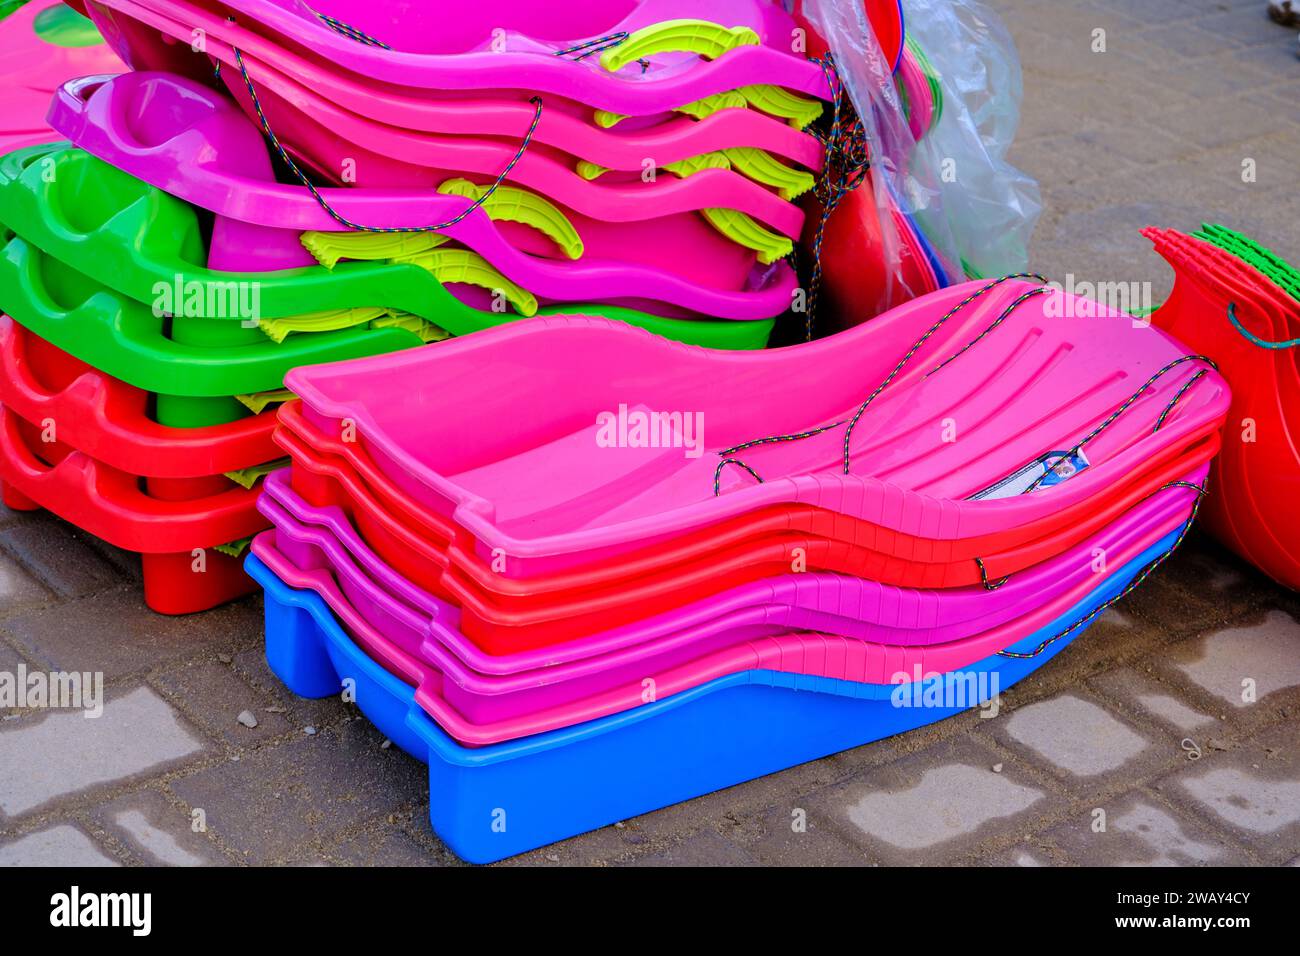 Background of the colorful sides of plastic sleds Stock Photo